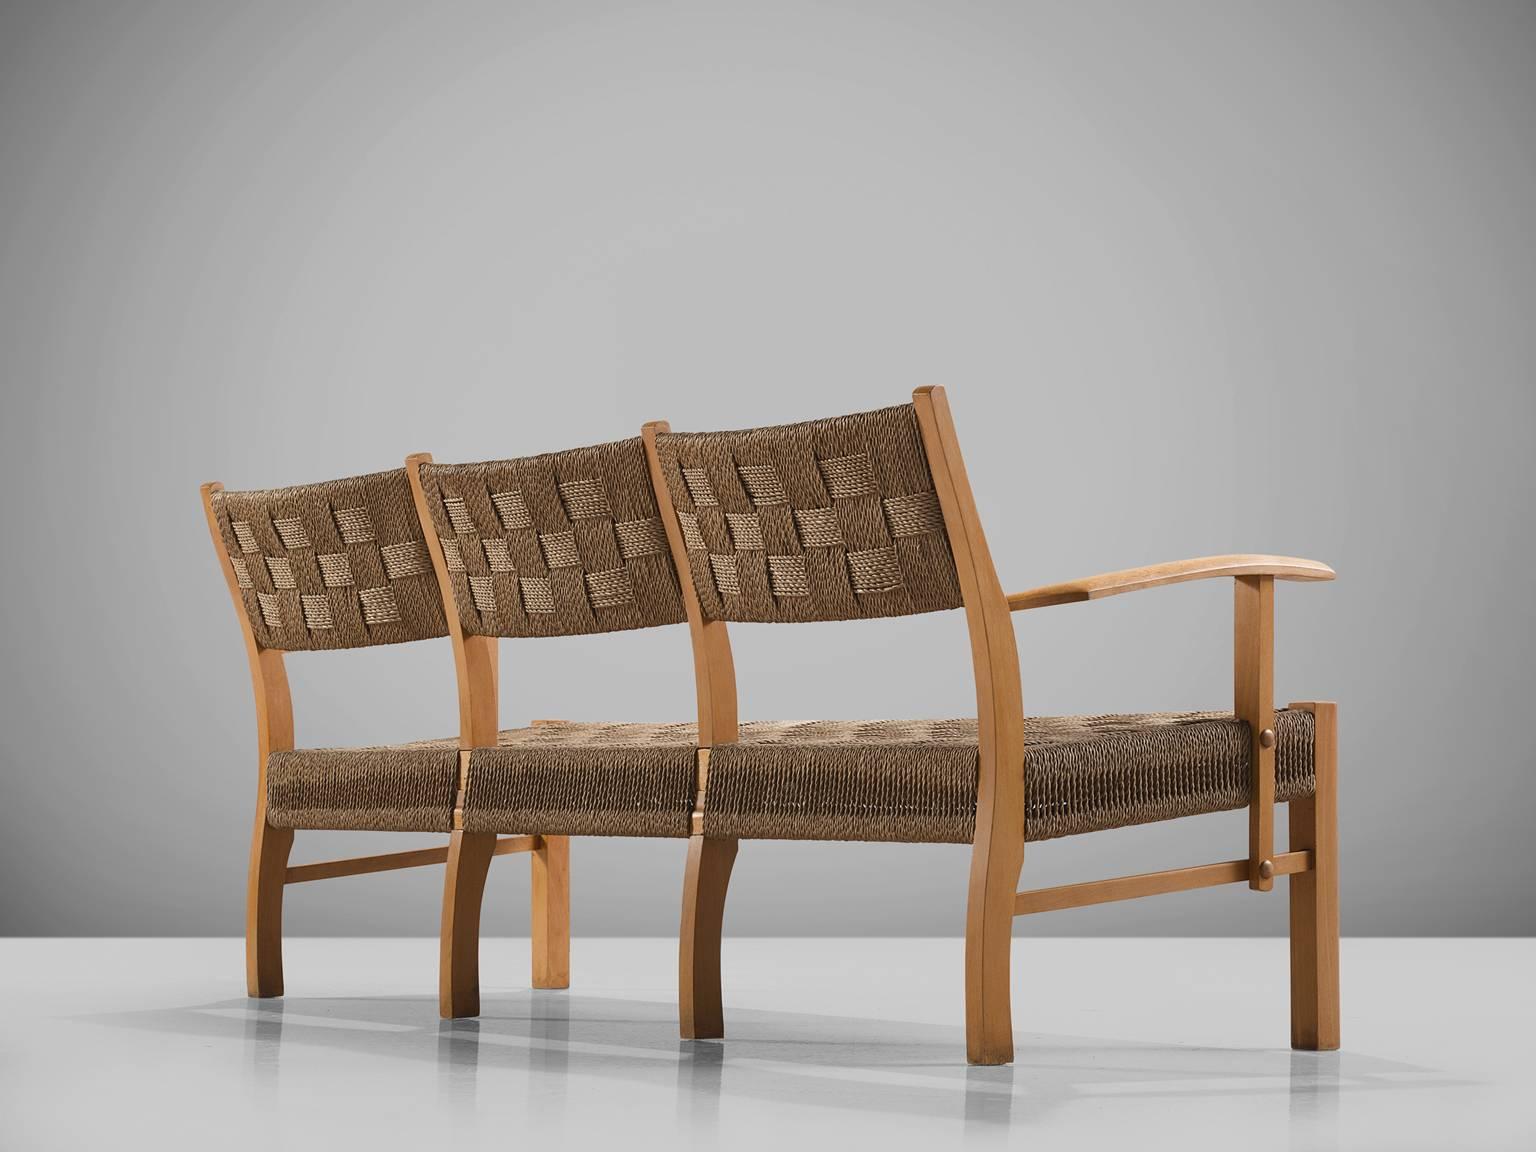 Three-seat sofa, in beech and seagrass, Denmark, 1950s.

Elegant wooden sofa with back and seating of braided seagrass rope. The frame of this sofa is made of solid beech and has a very nice and warm blond color. The back-legs and armrests show